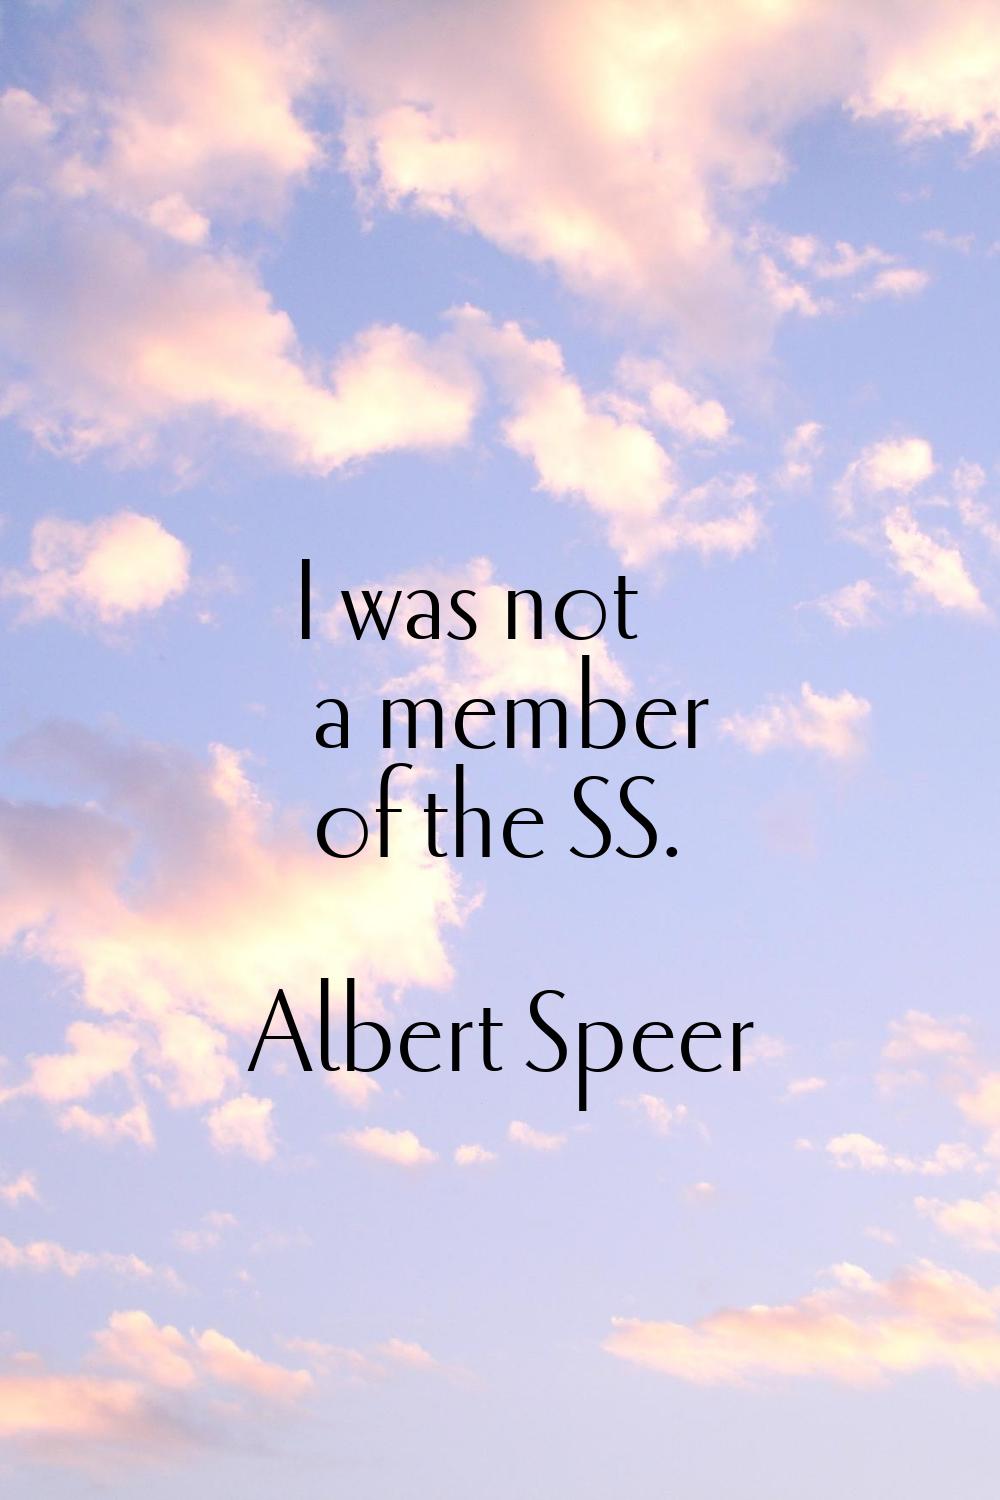 I was not a member of the SS.